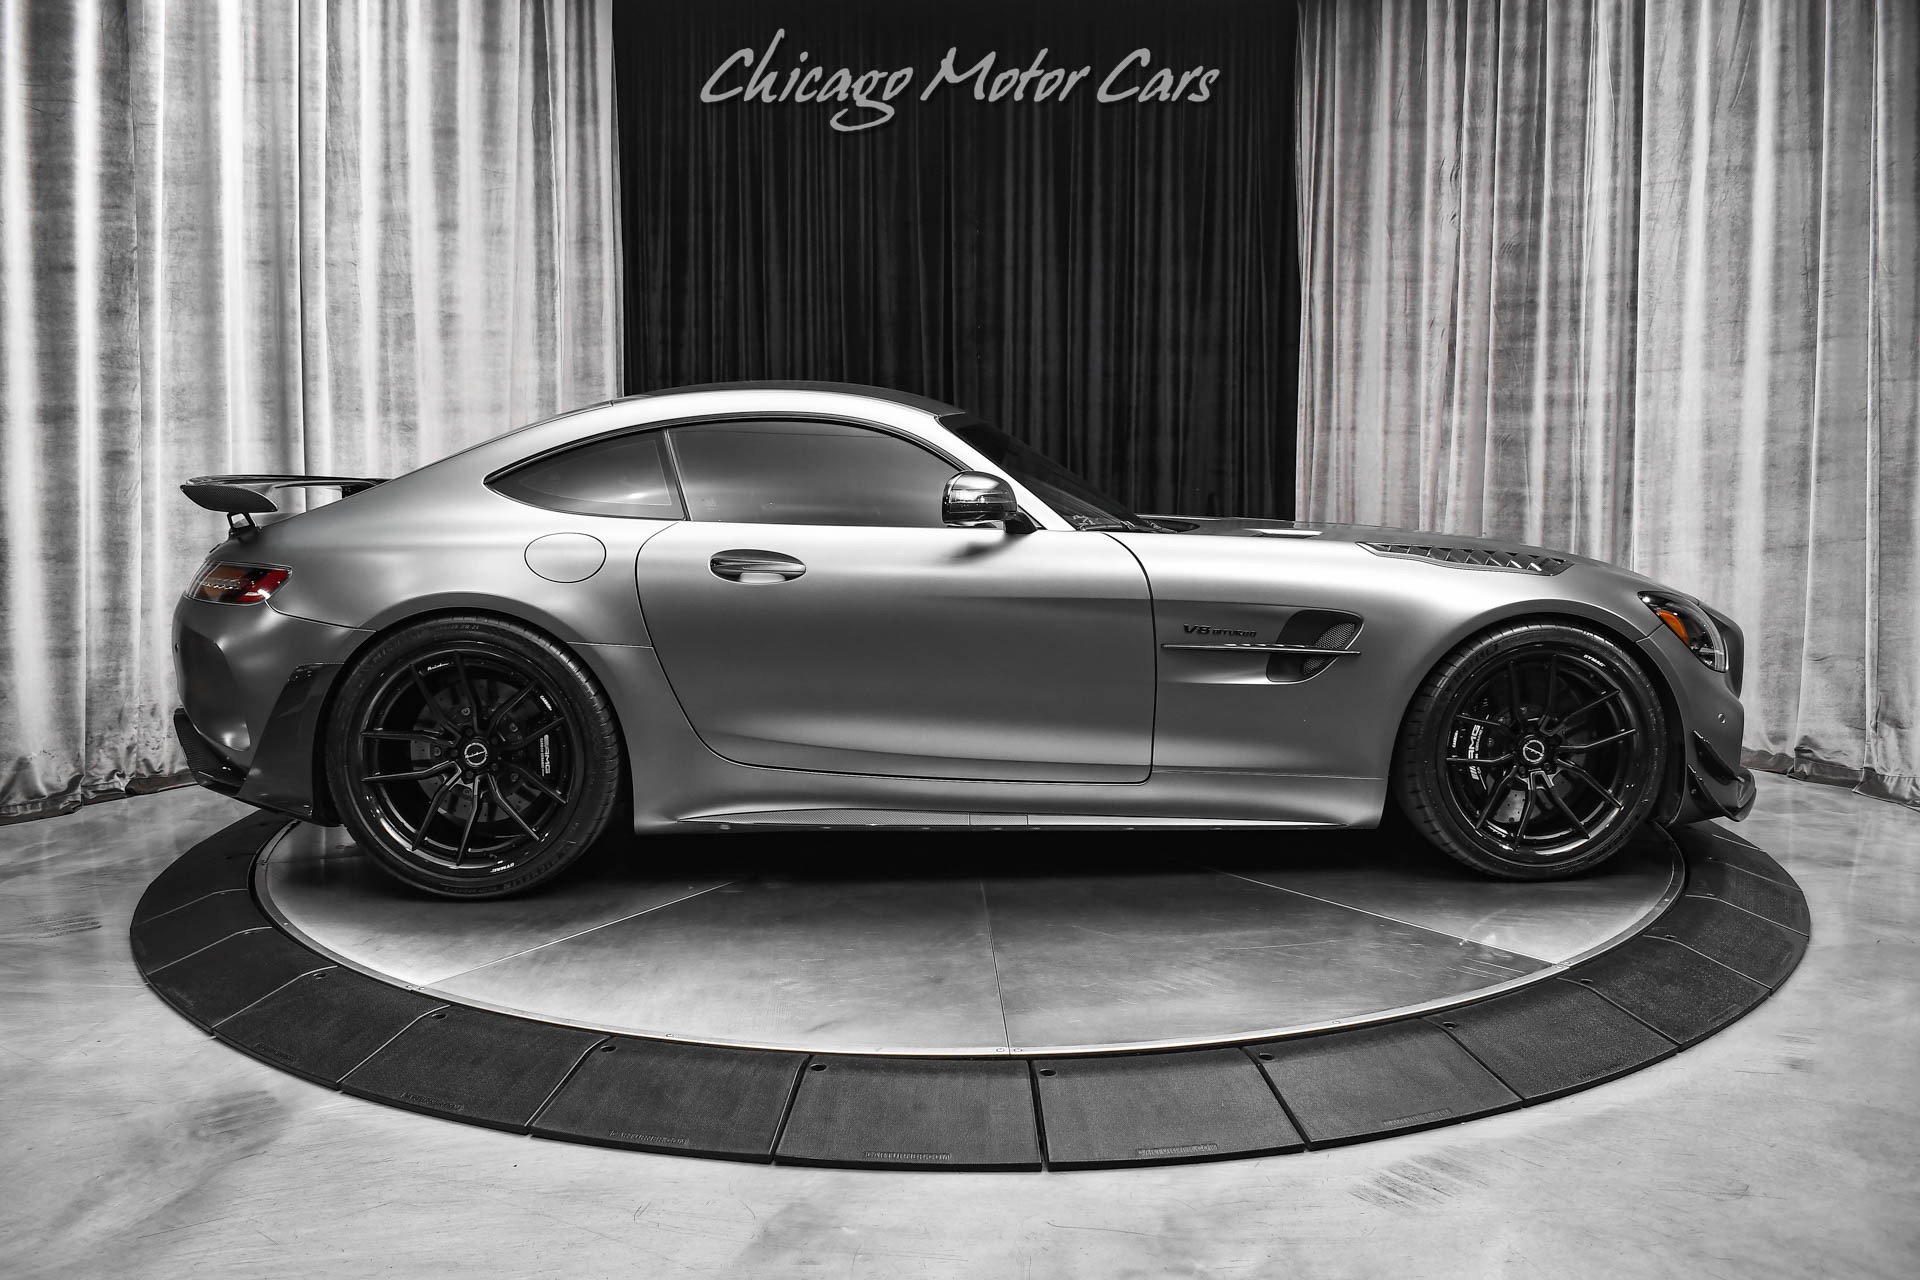 Used-2020-Mercedes-Benz-AMG-GT-R-Pro-RENNTECH-UPGRADES-RARE-STAGE-3-FULL-PPF-BRIXTON-FORGED-CARBON-WHEELS